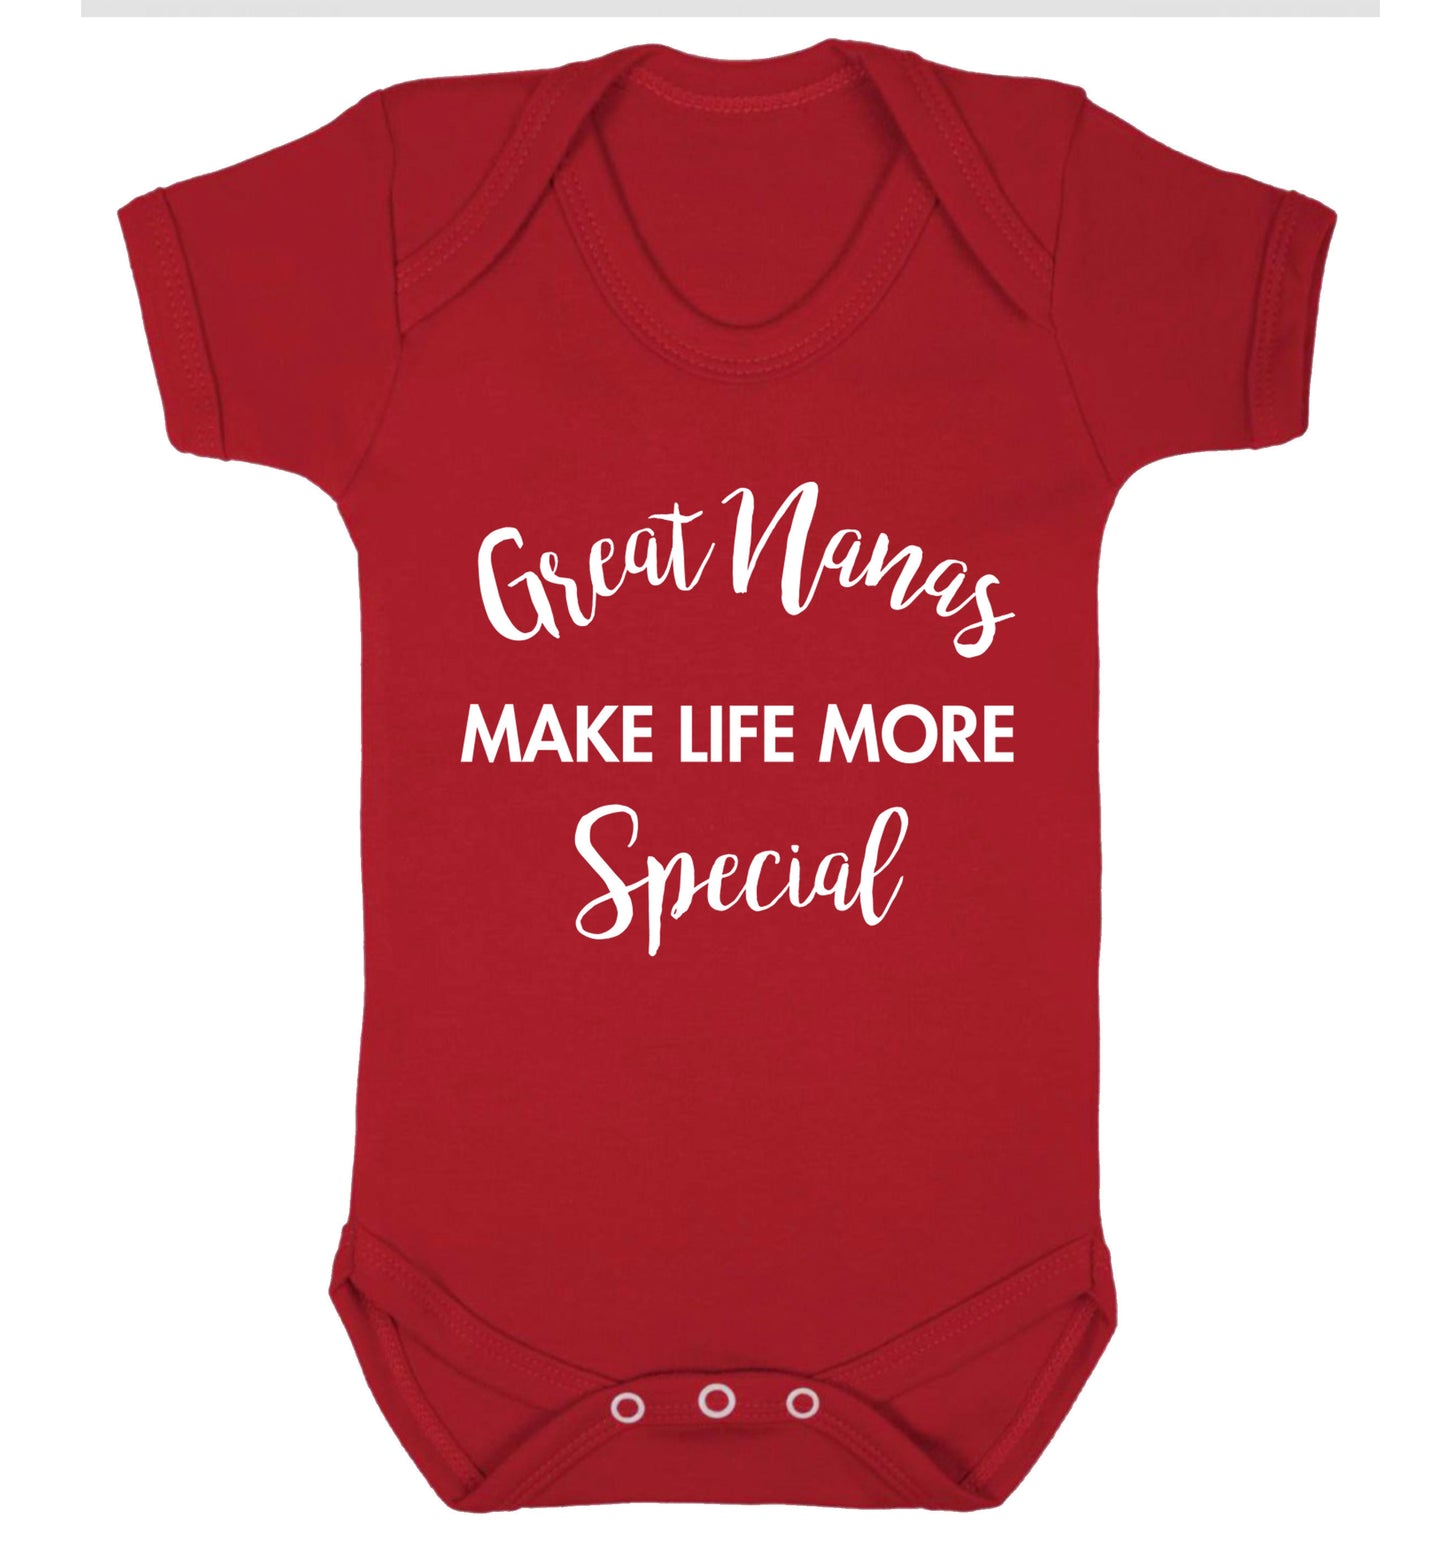 Great nanas make life more special Baby Vest red 18-24 months